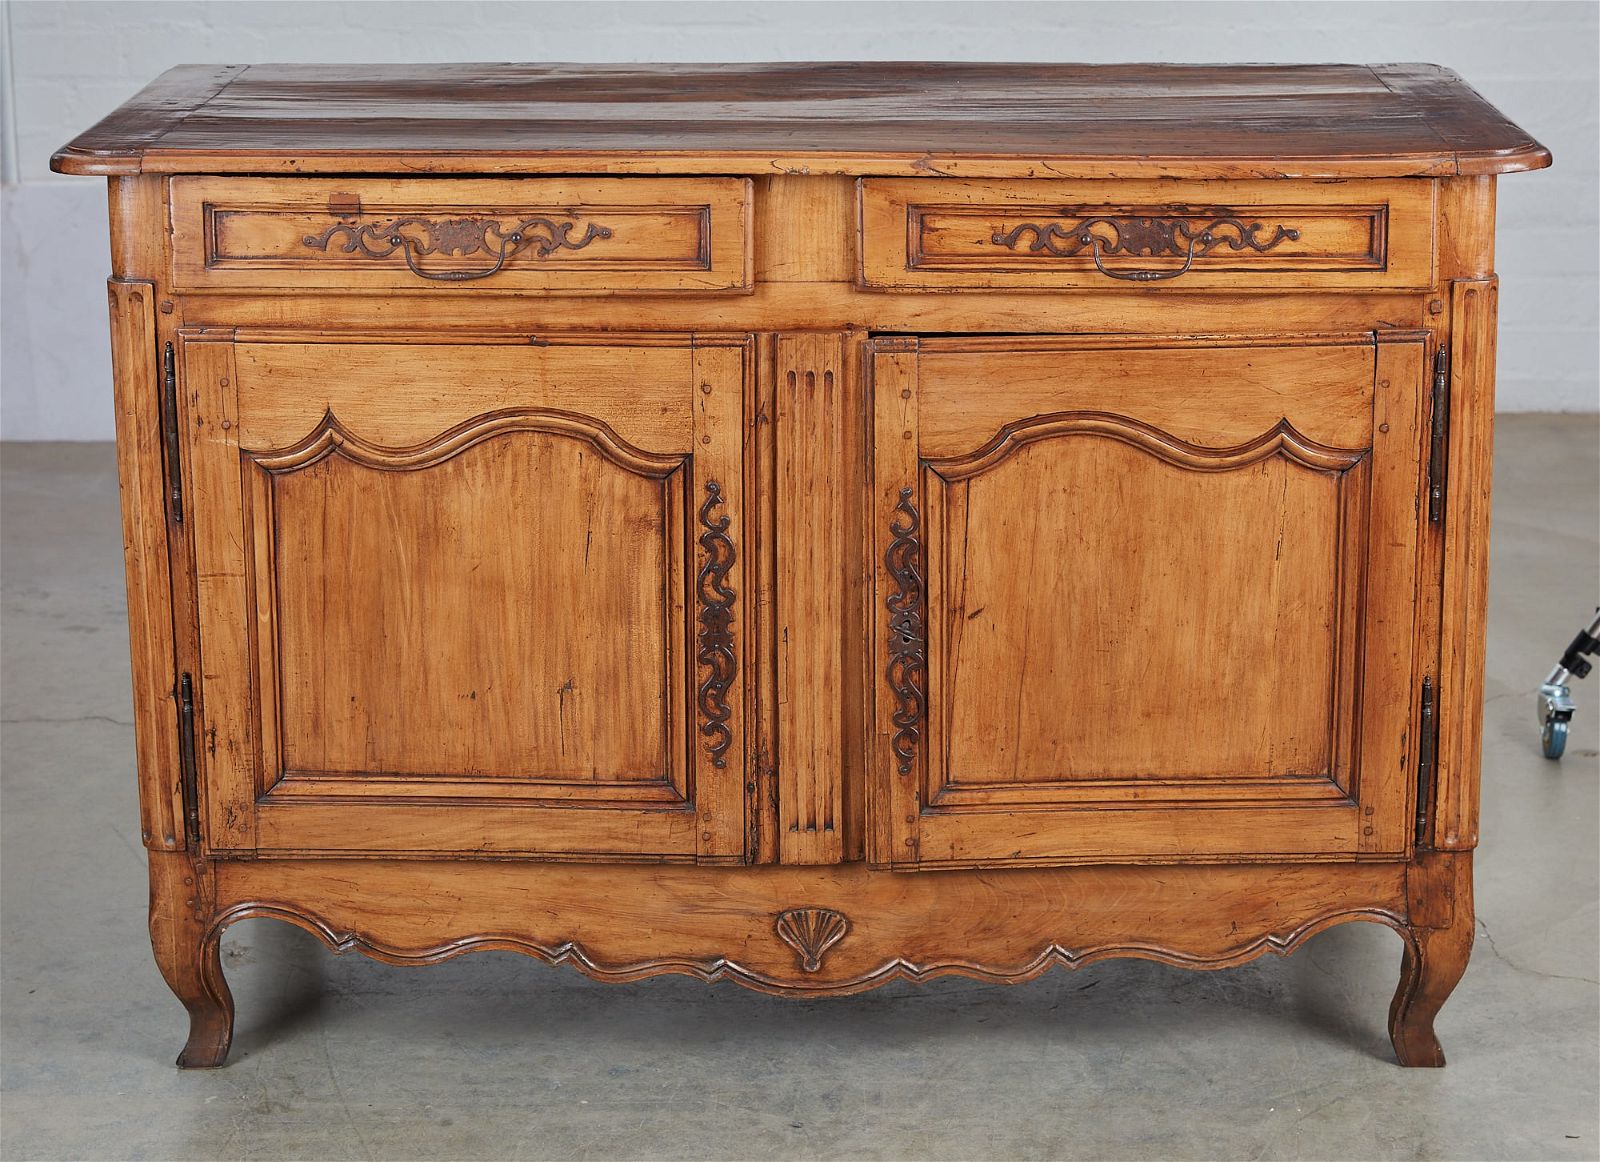 A FRENCH PROVINCIAL CHERRY WOOD